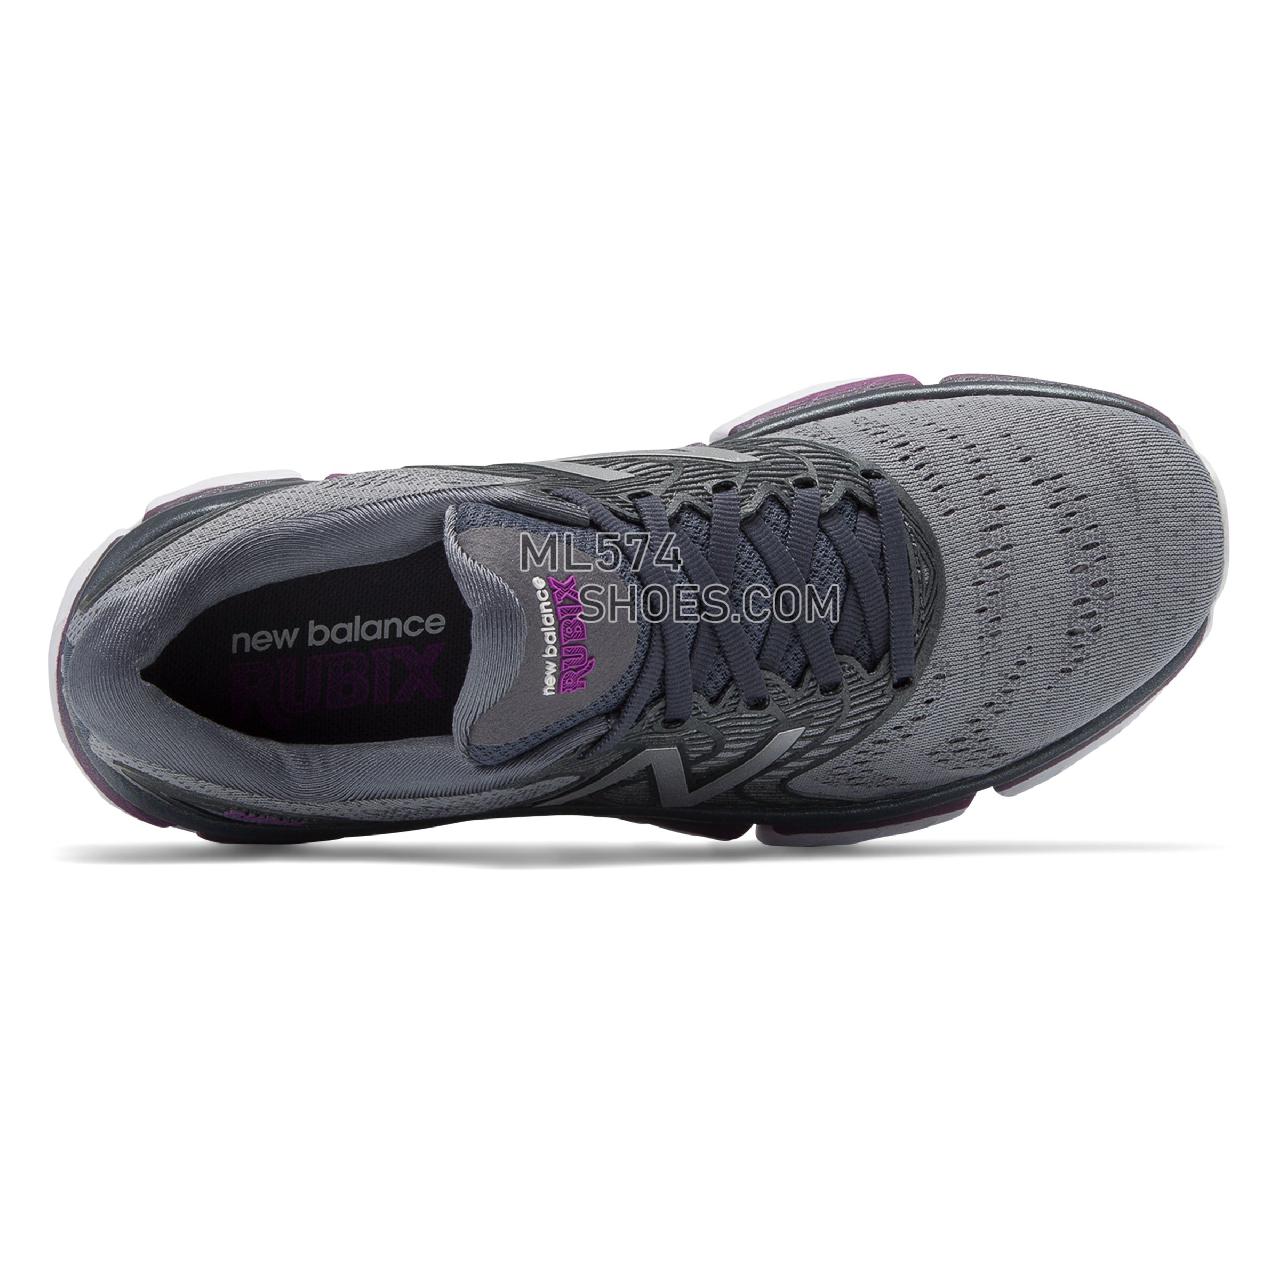 New Balance Rubix - Women's Stability Running - Lead with Voltage Violet and Steel - WRUBXGB